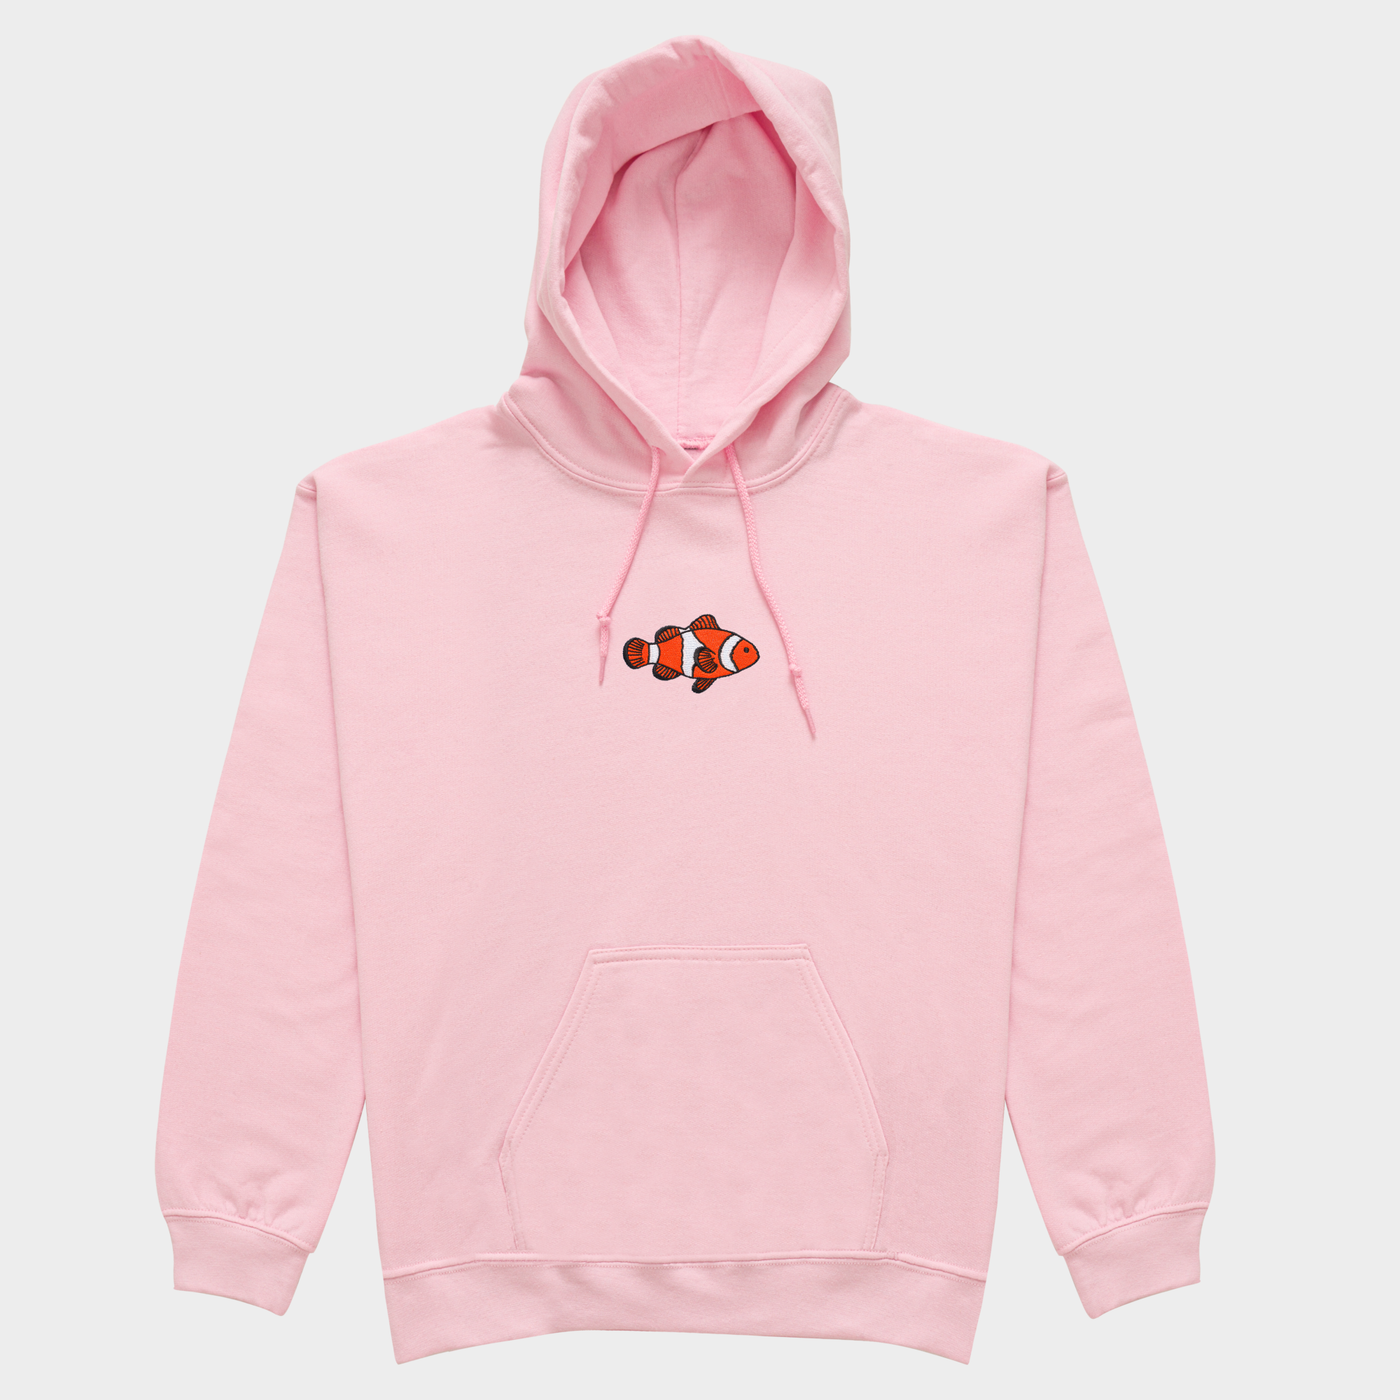 Bobby's Planet Women's Embroidered Clownfish Hoodie from Seven Seas Fish Animals Collection in Light Pink Color#color_light-pink